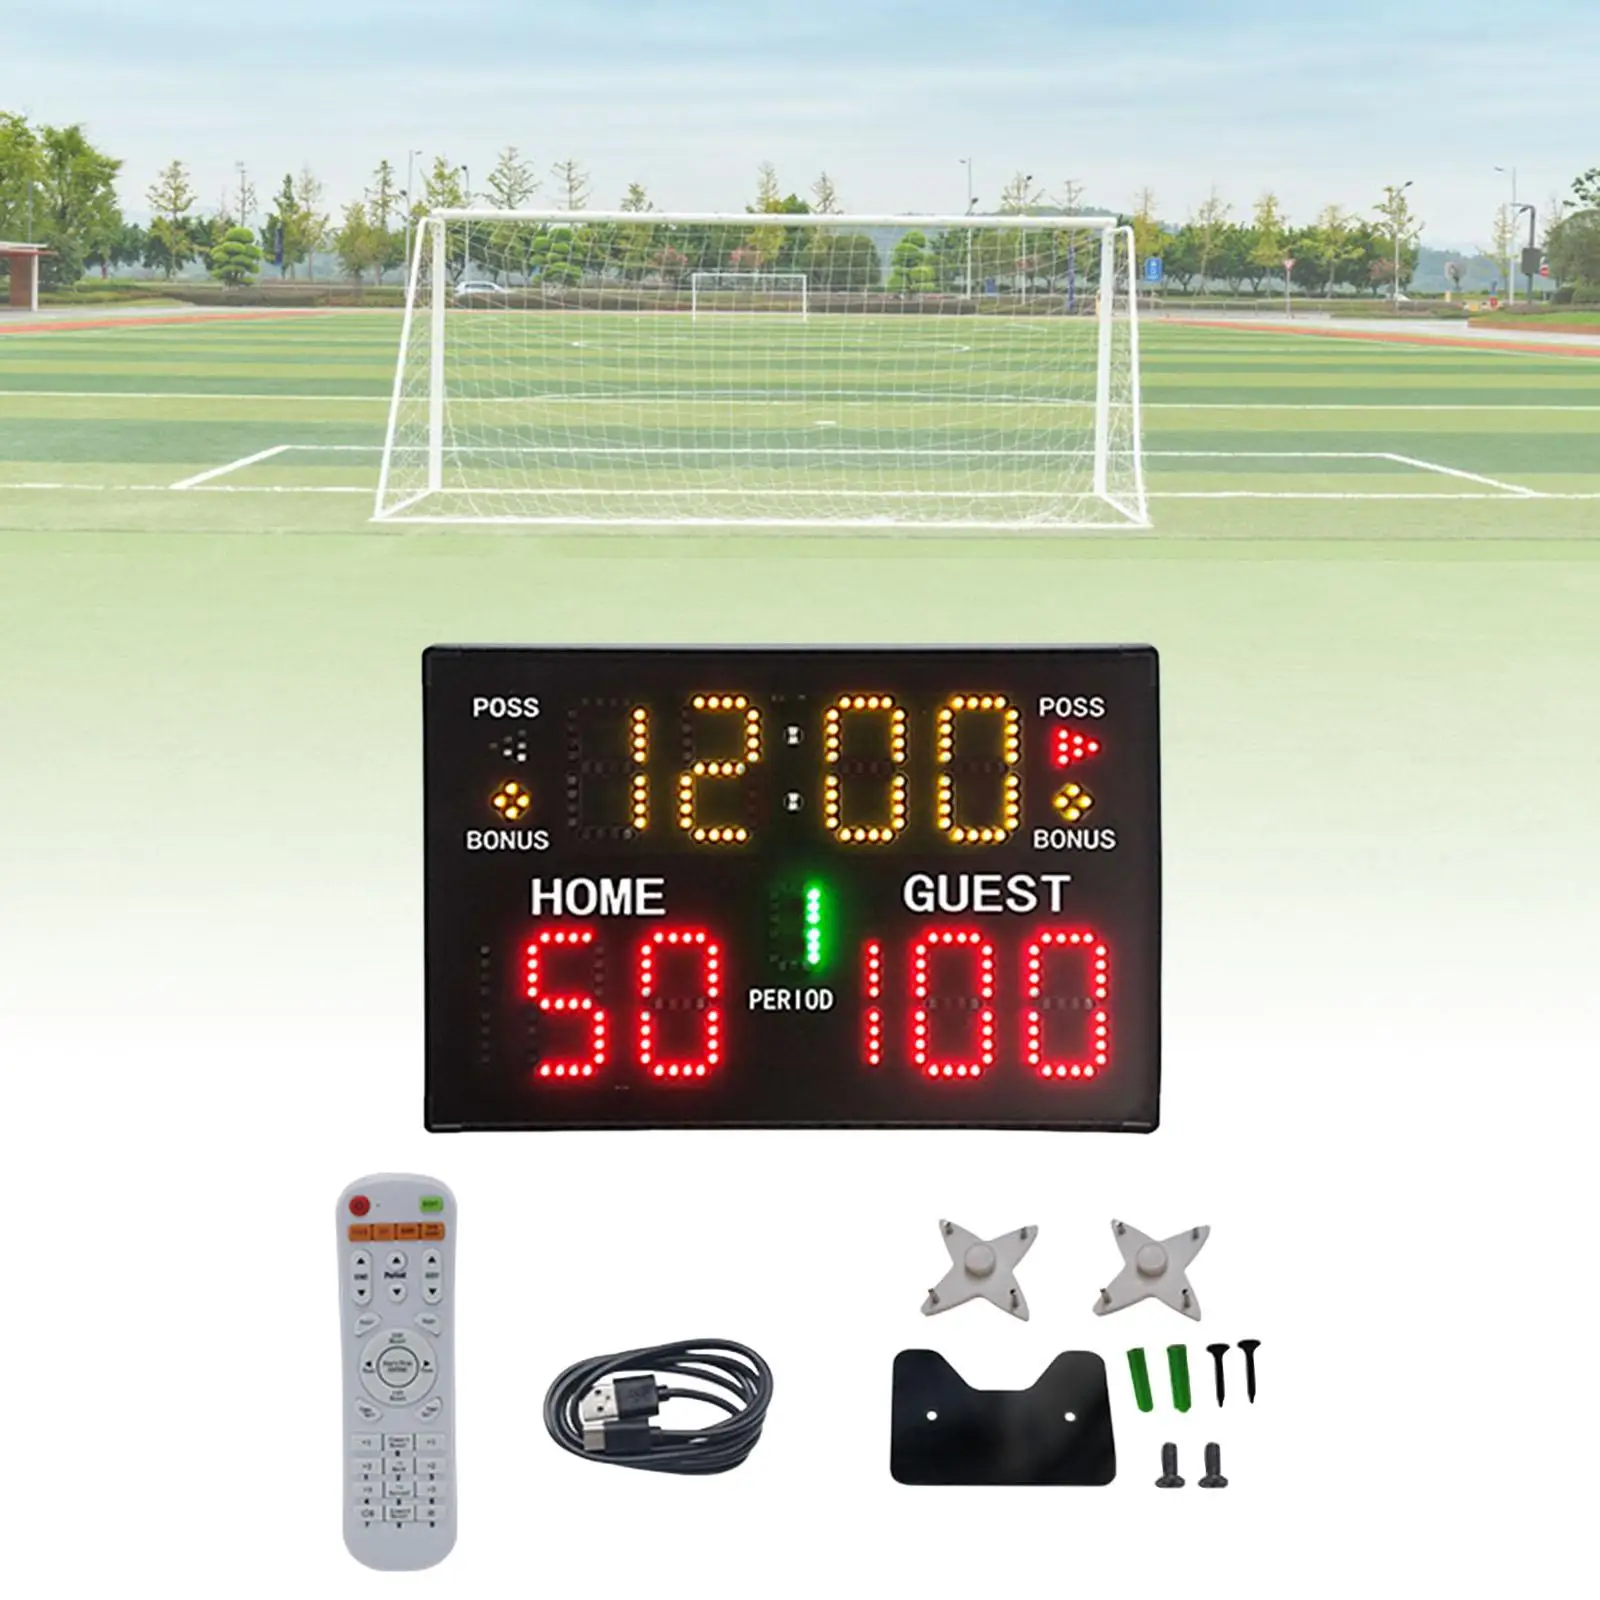 Tabletop Digital Scoreboard Portable Professional Wall Hanging Battery Powered Electronic Scoreboard for Indoor Volleyball